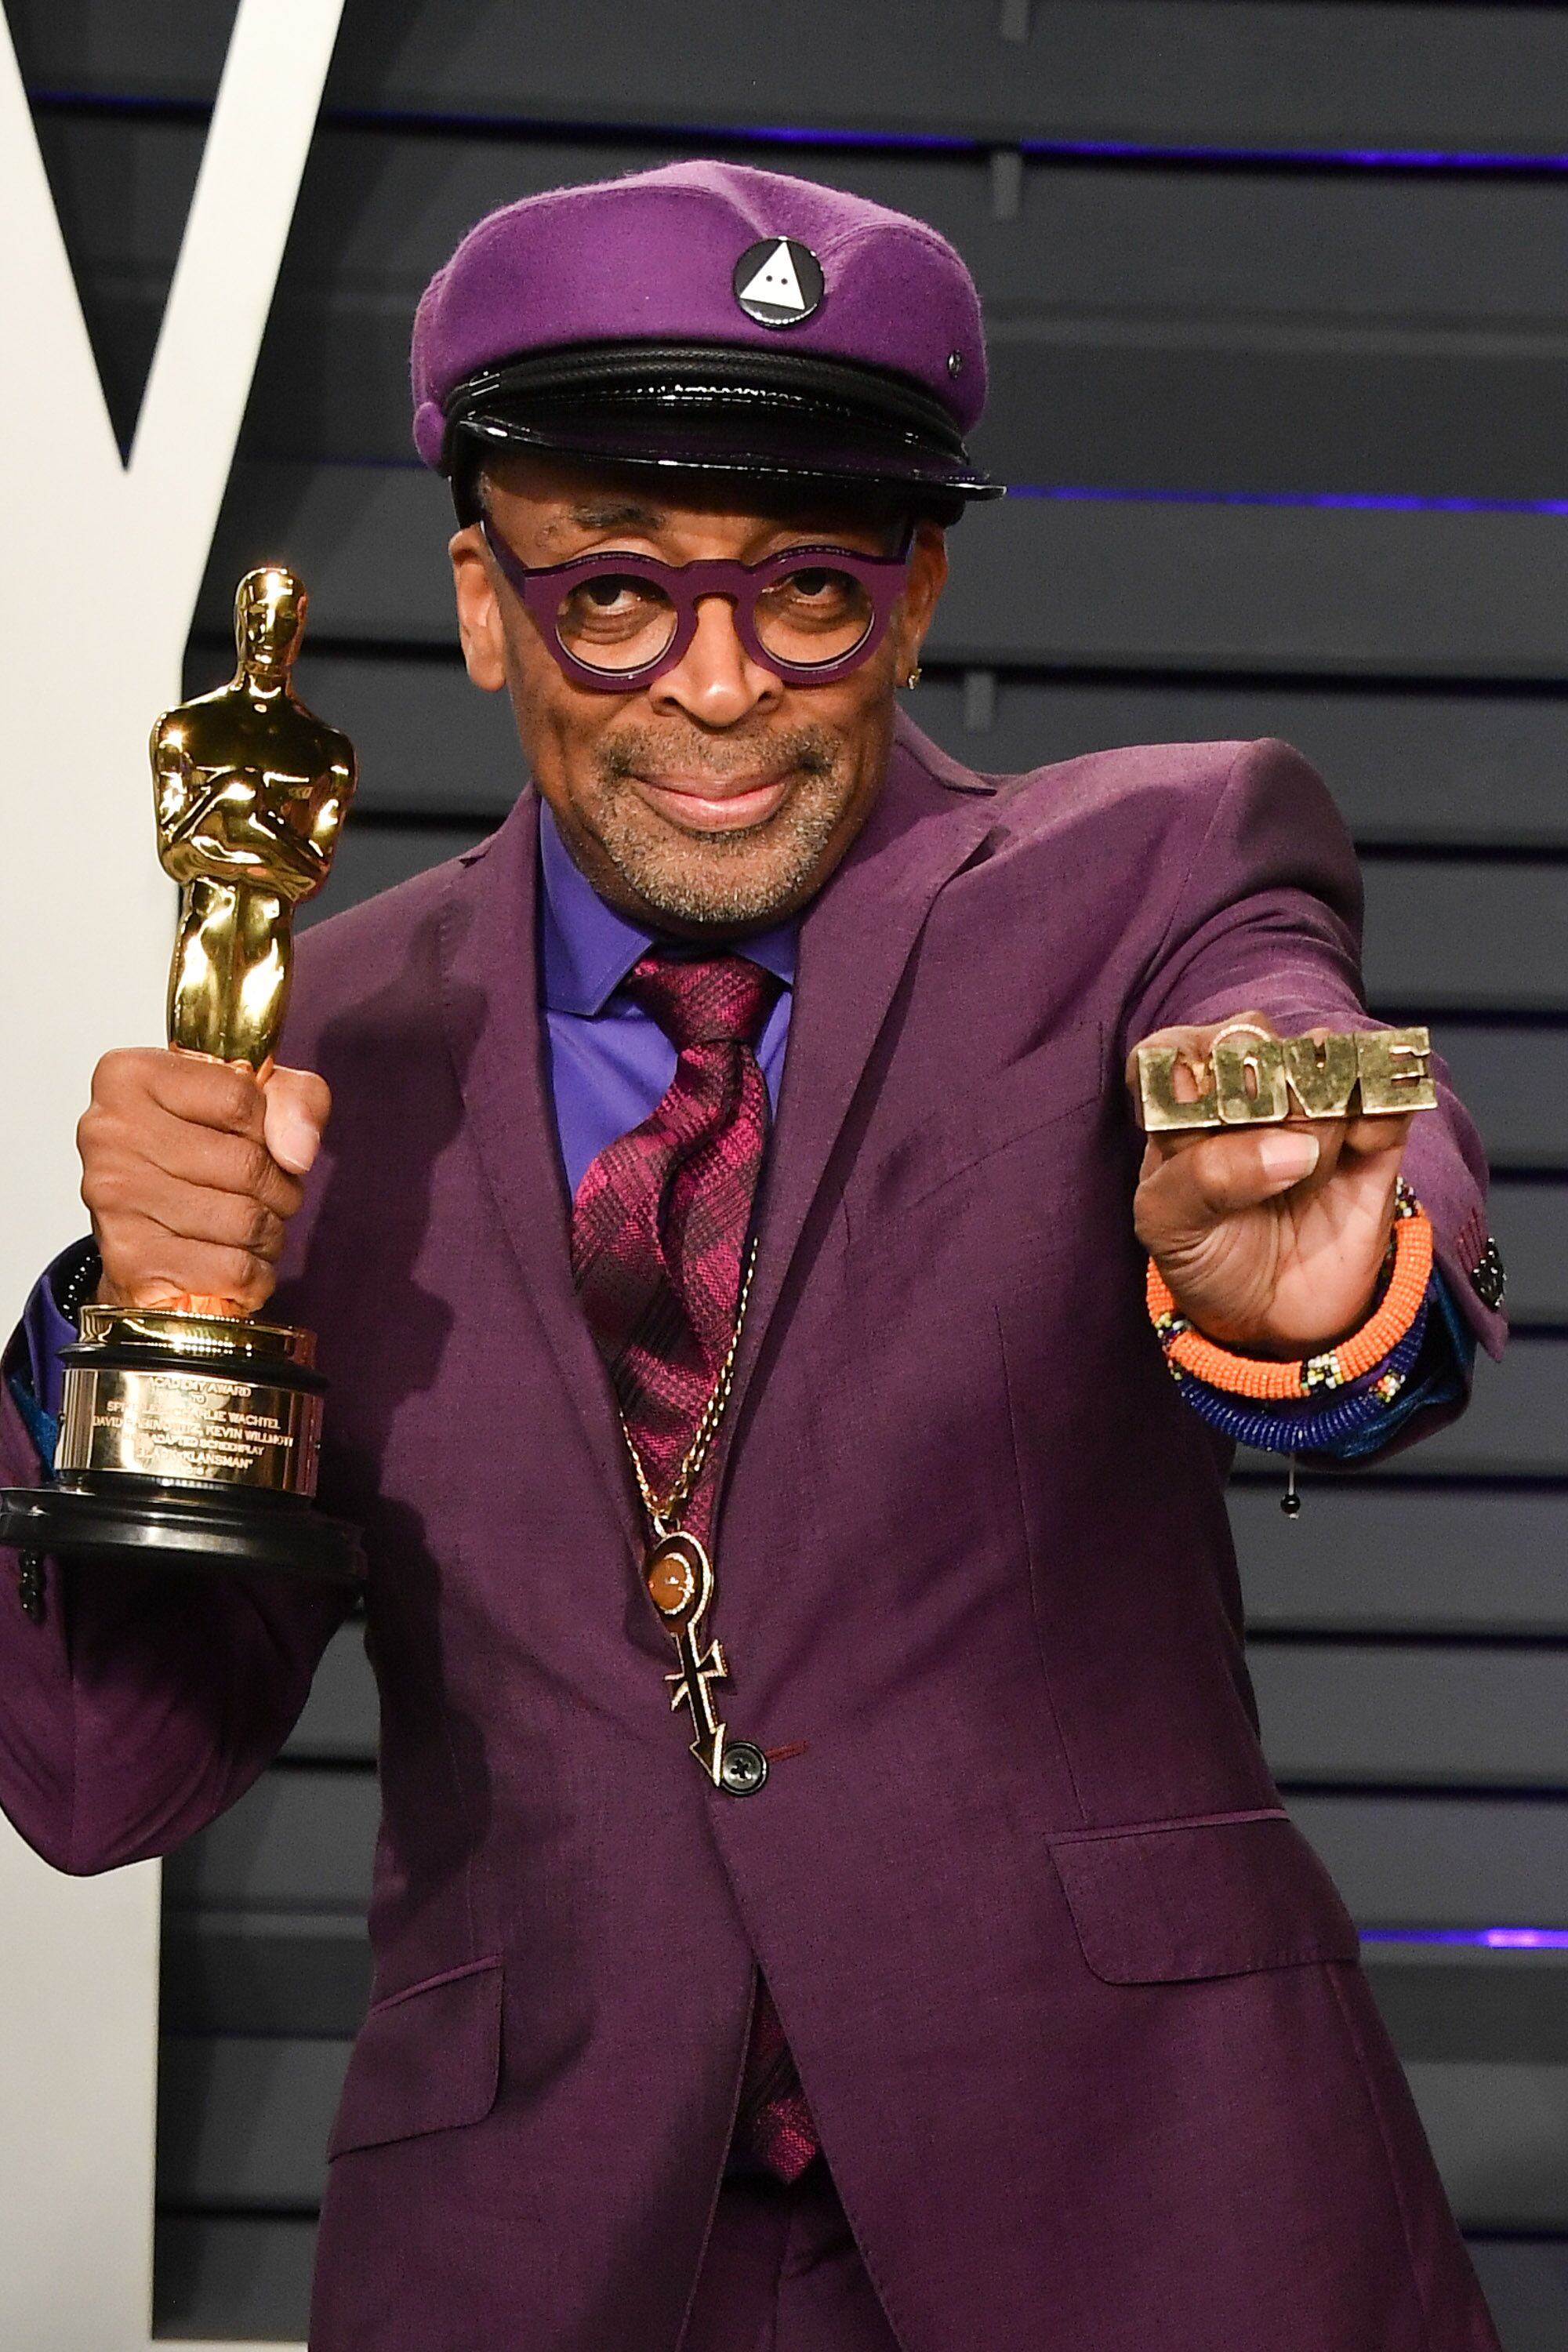 Spike Lee after receiving an Oscar | Source: Getty Images/GlobalImagesUkraine